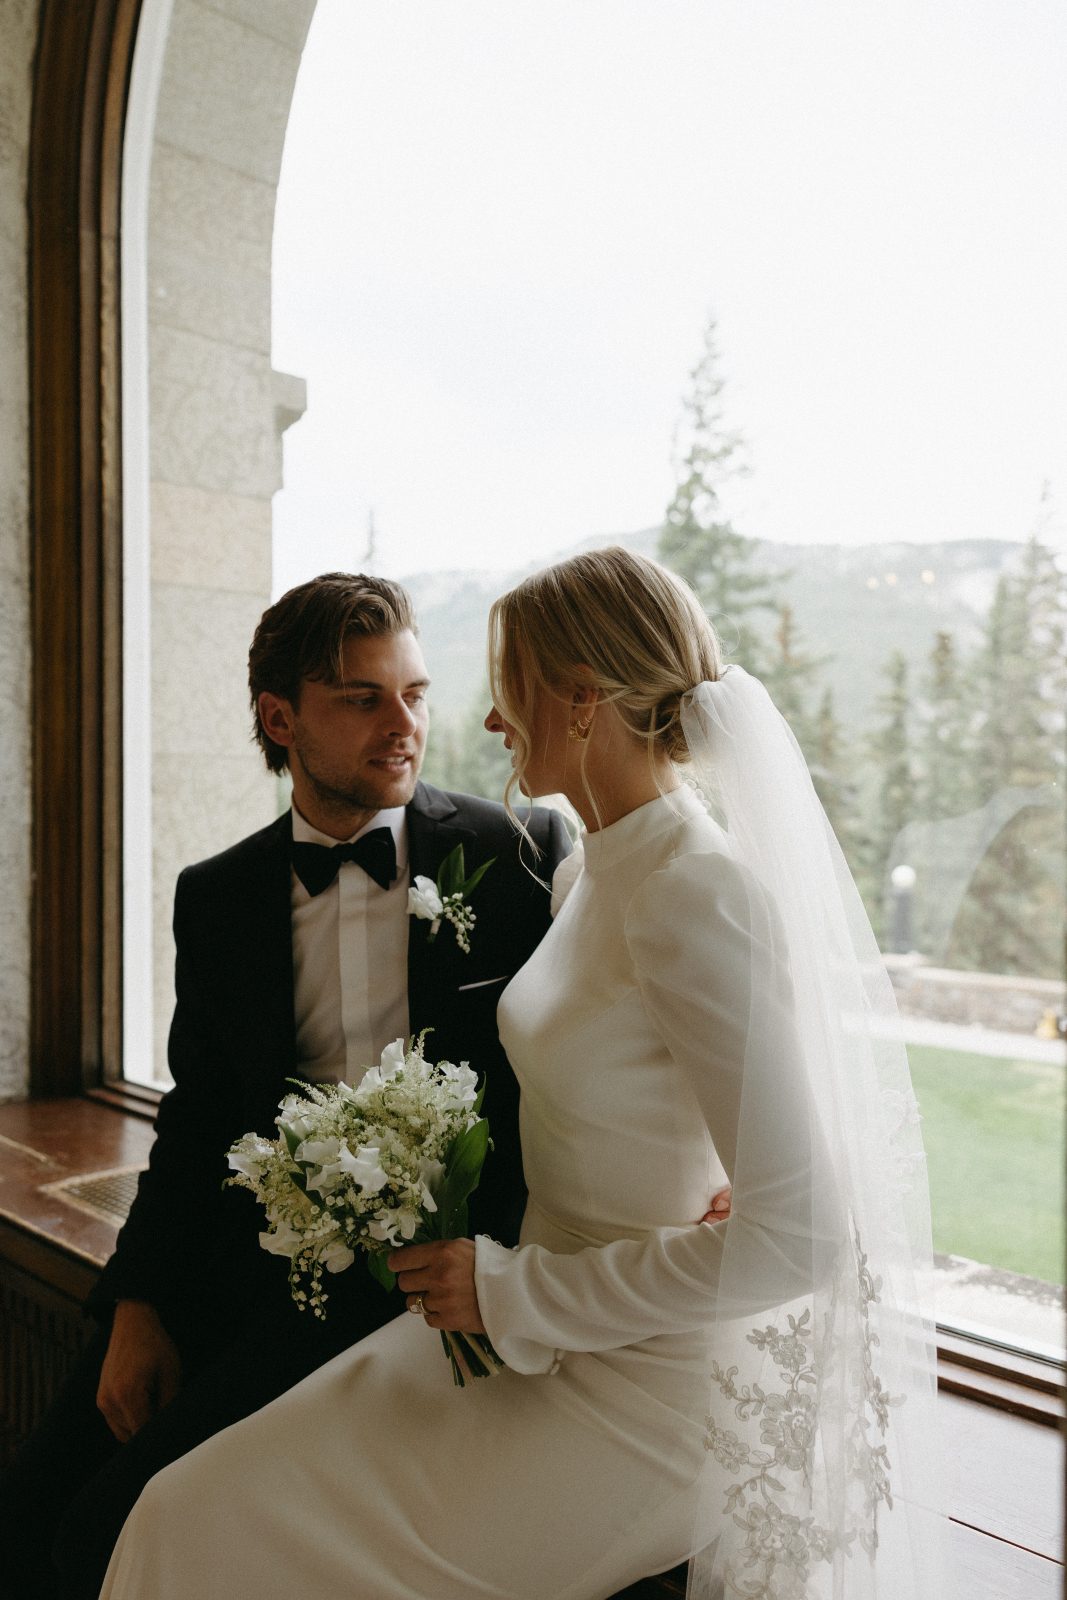 A Calyx couple sitting at a window at the Banff Fairmont